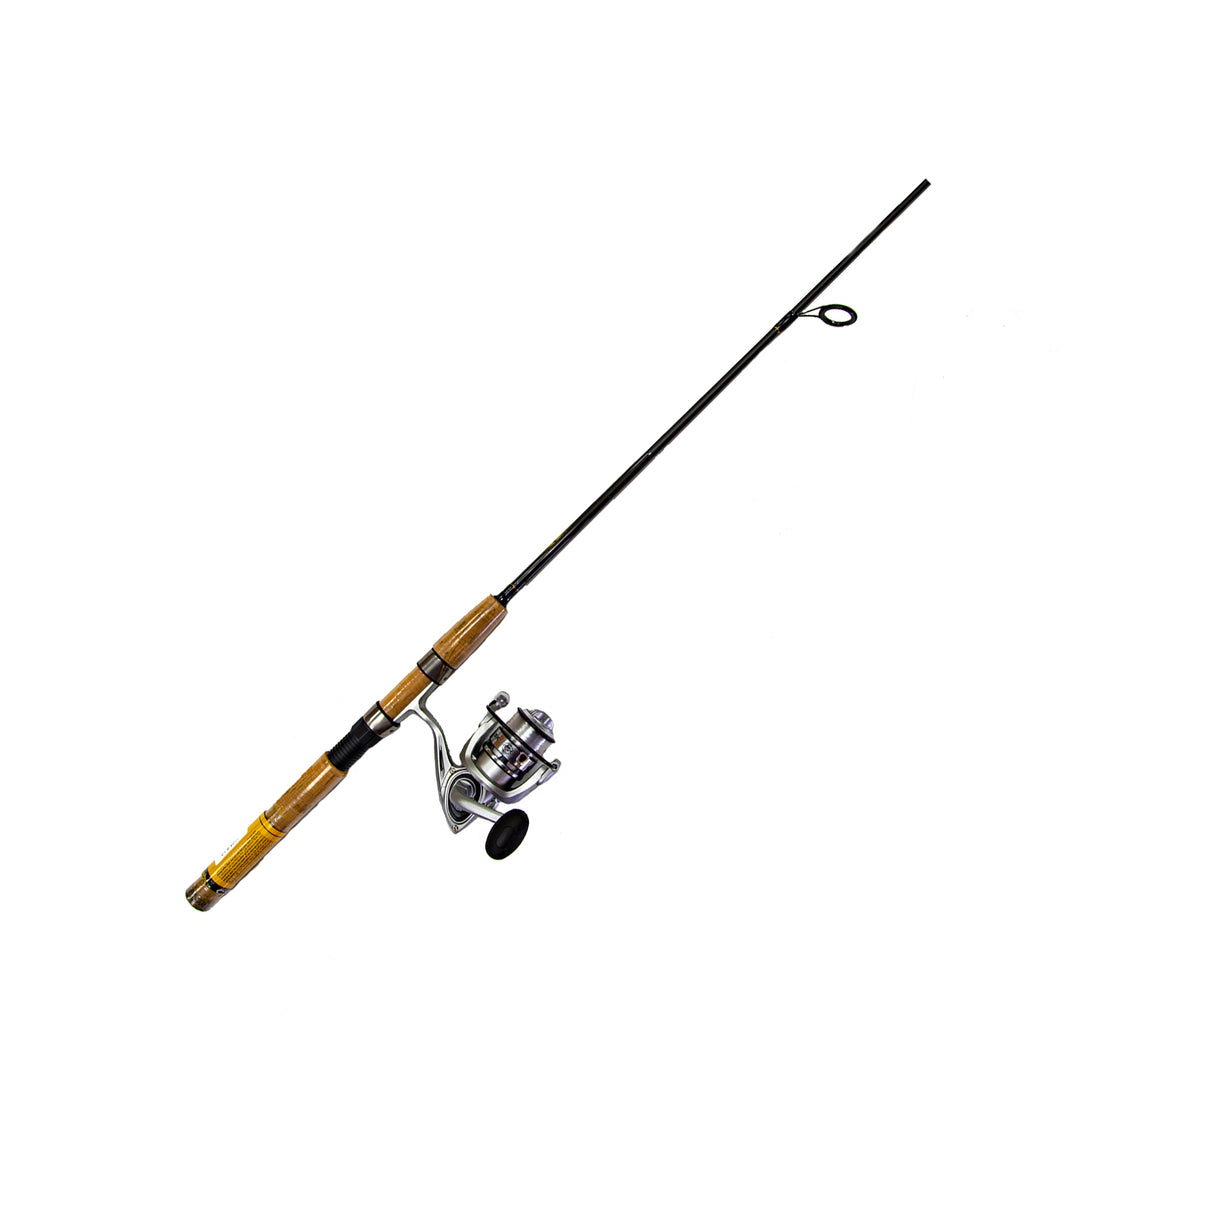 CAPE COD CLASSIC FRESHWATER 5'6" LIGHT SPINNING COMBO